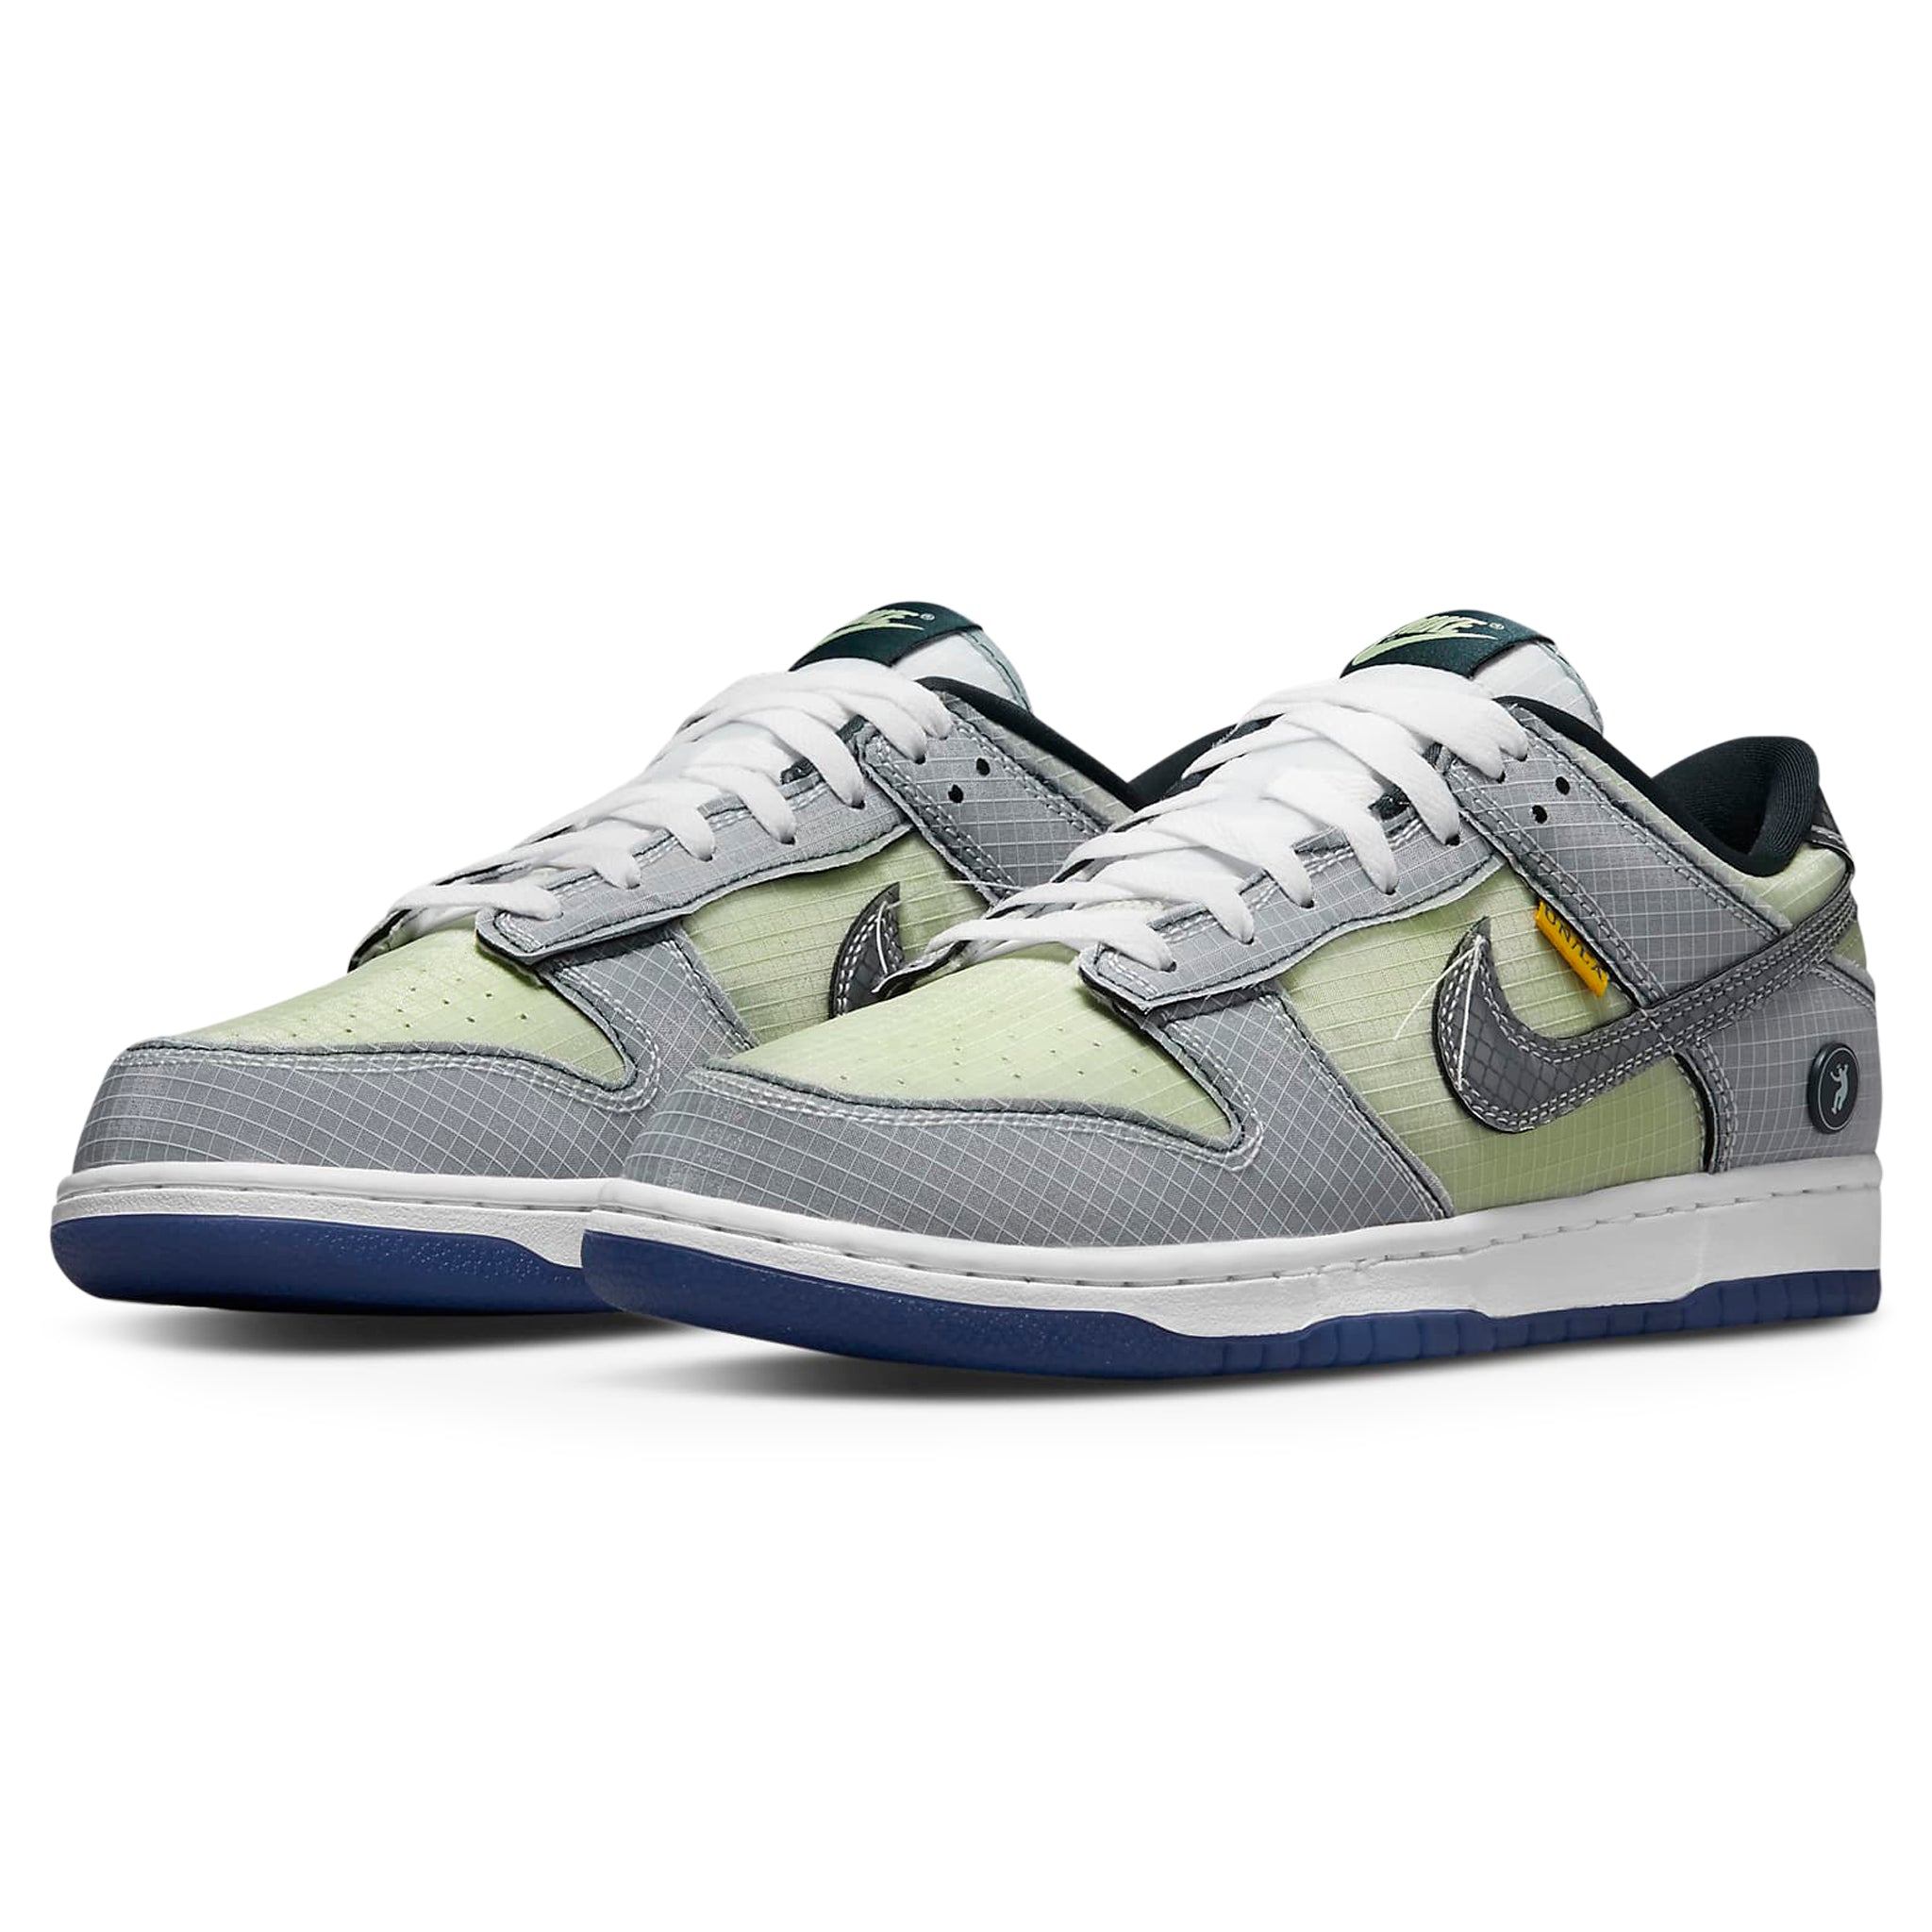 Front side view of Nike x Union Dunk Low Passport Pack Pistachio DJ9649-401